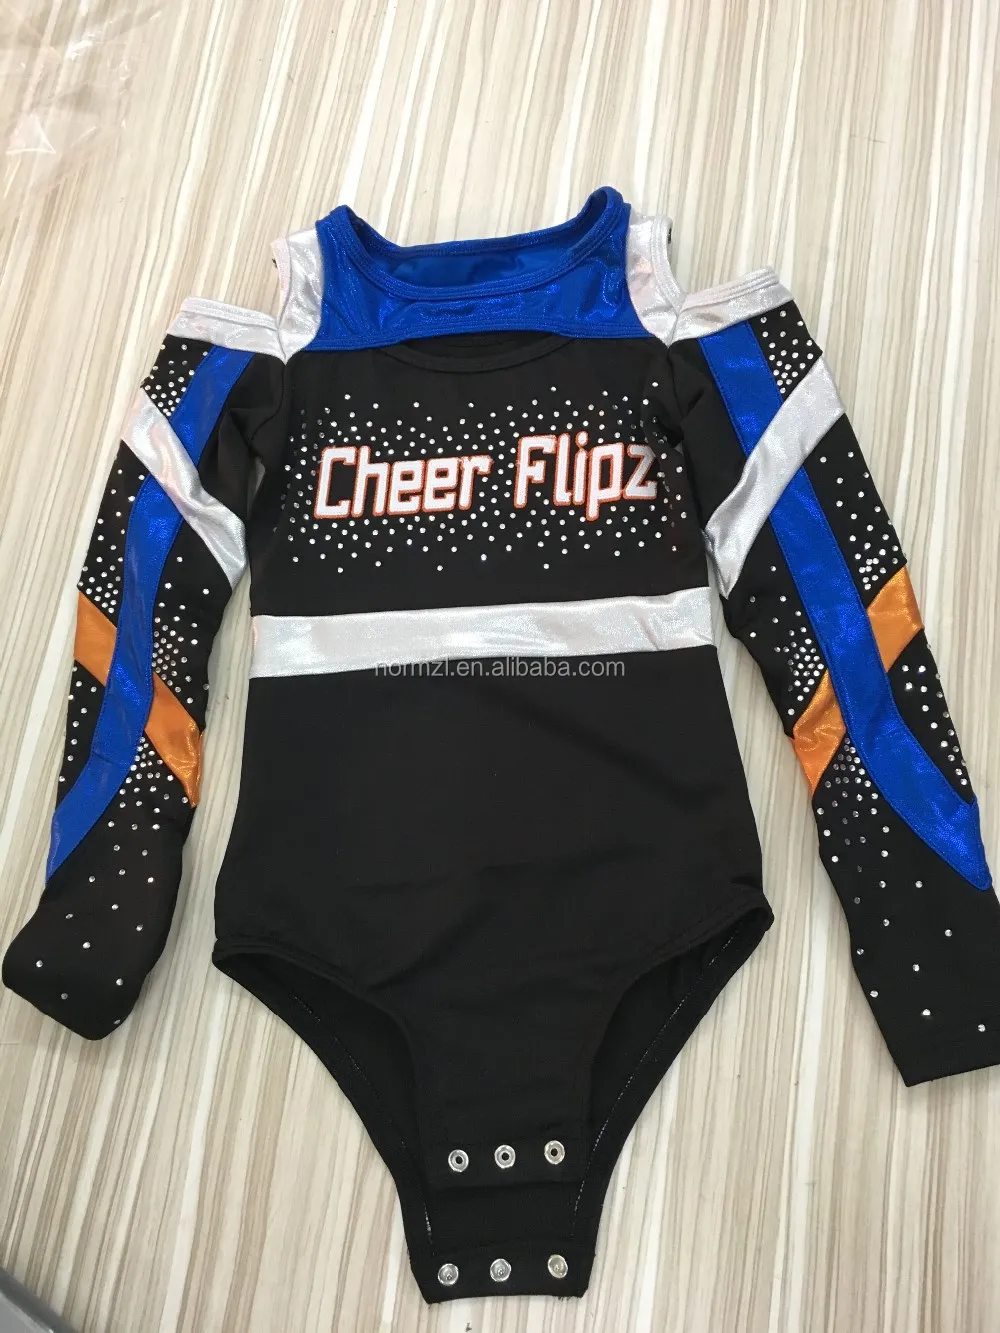 sparkle one piece cheer outfit